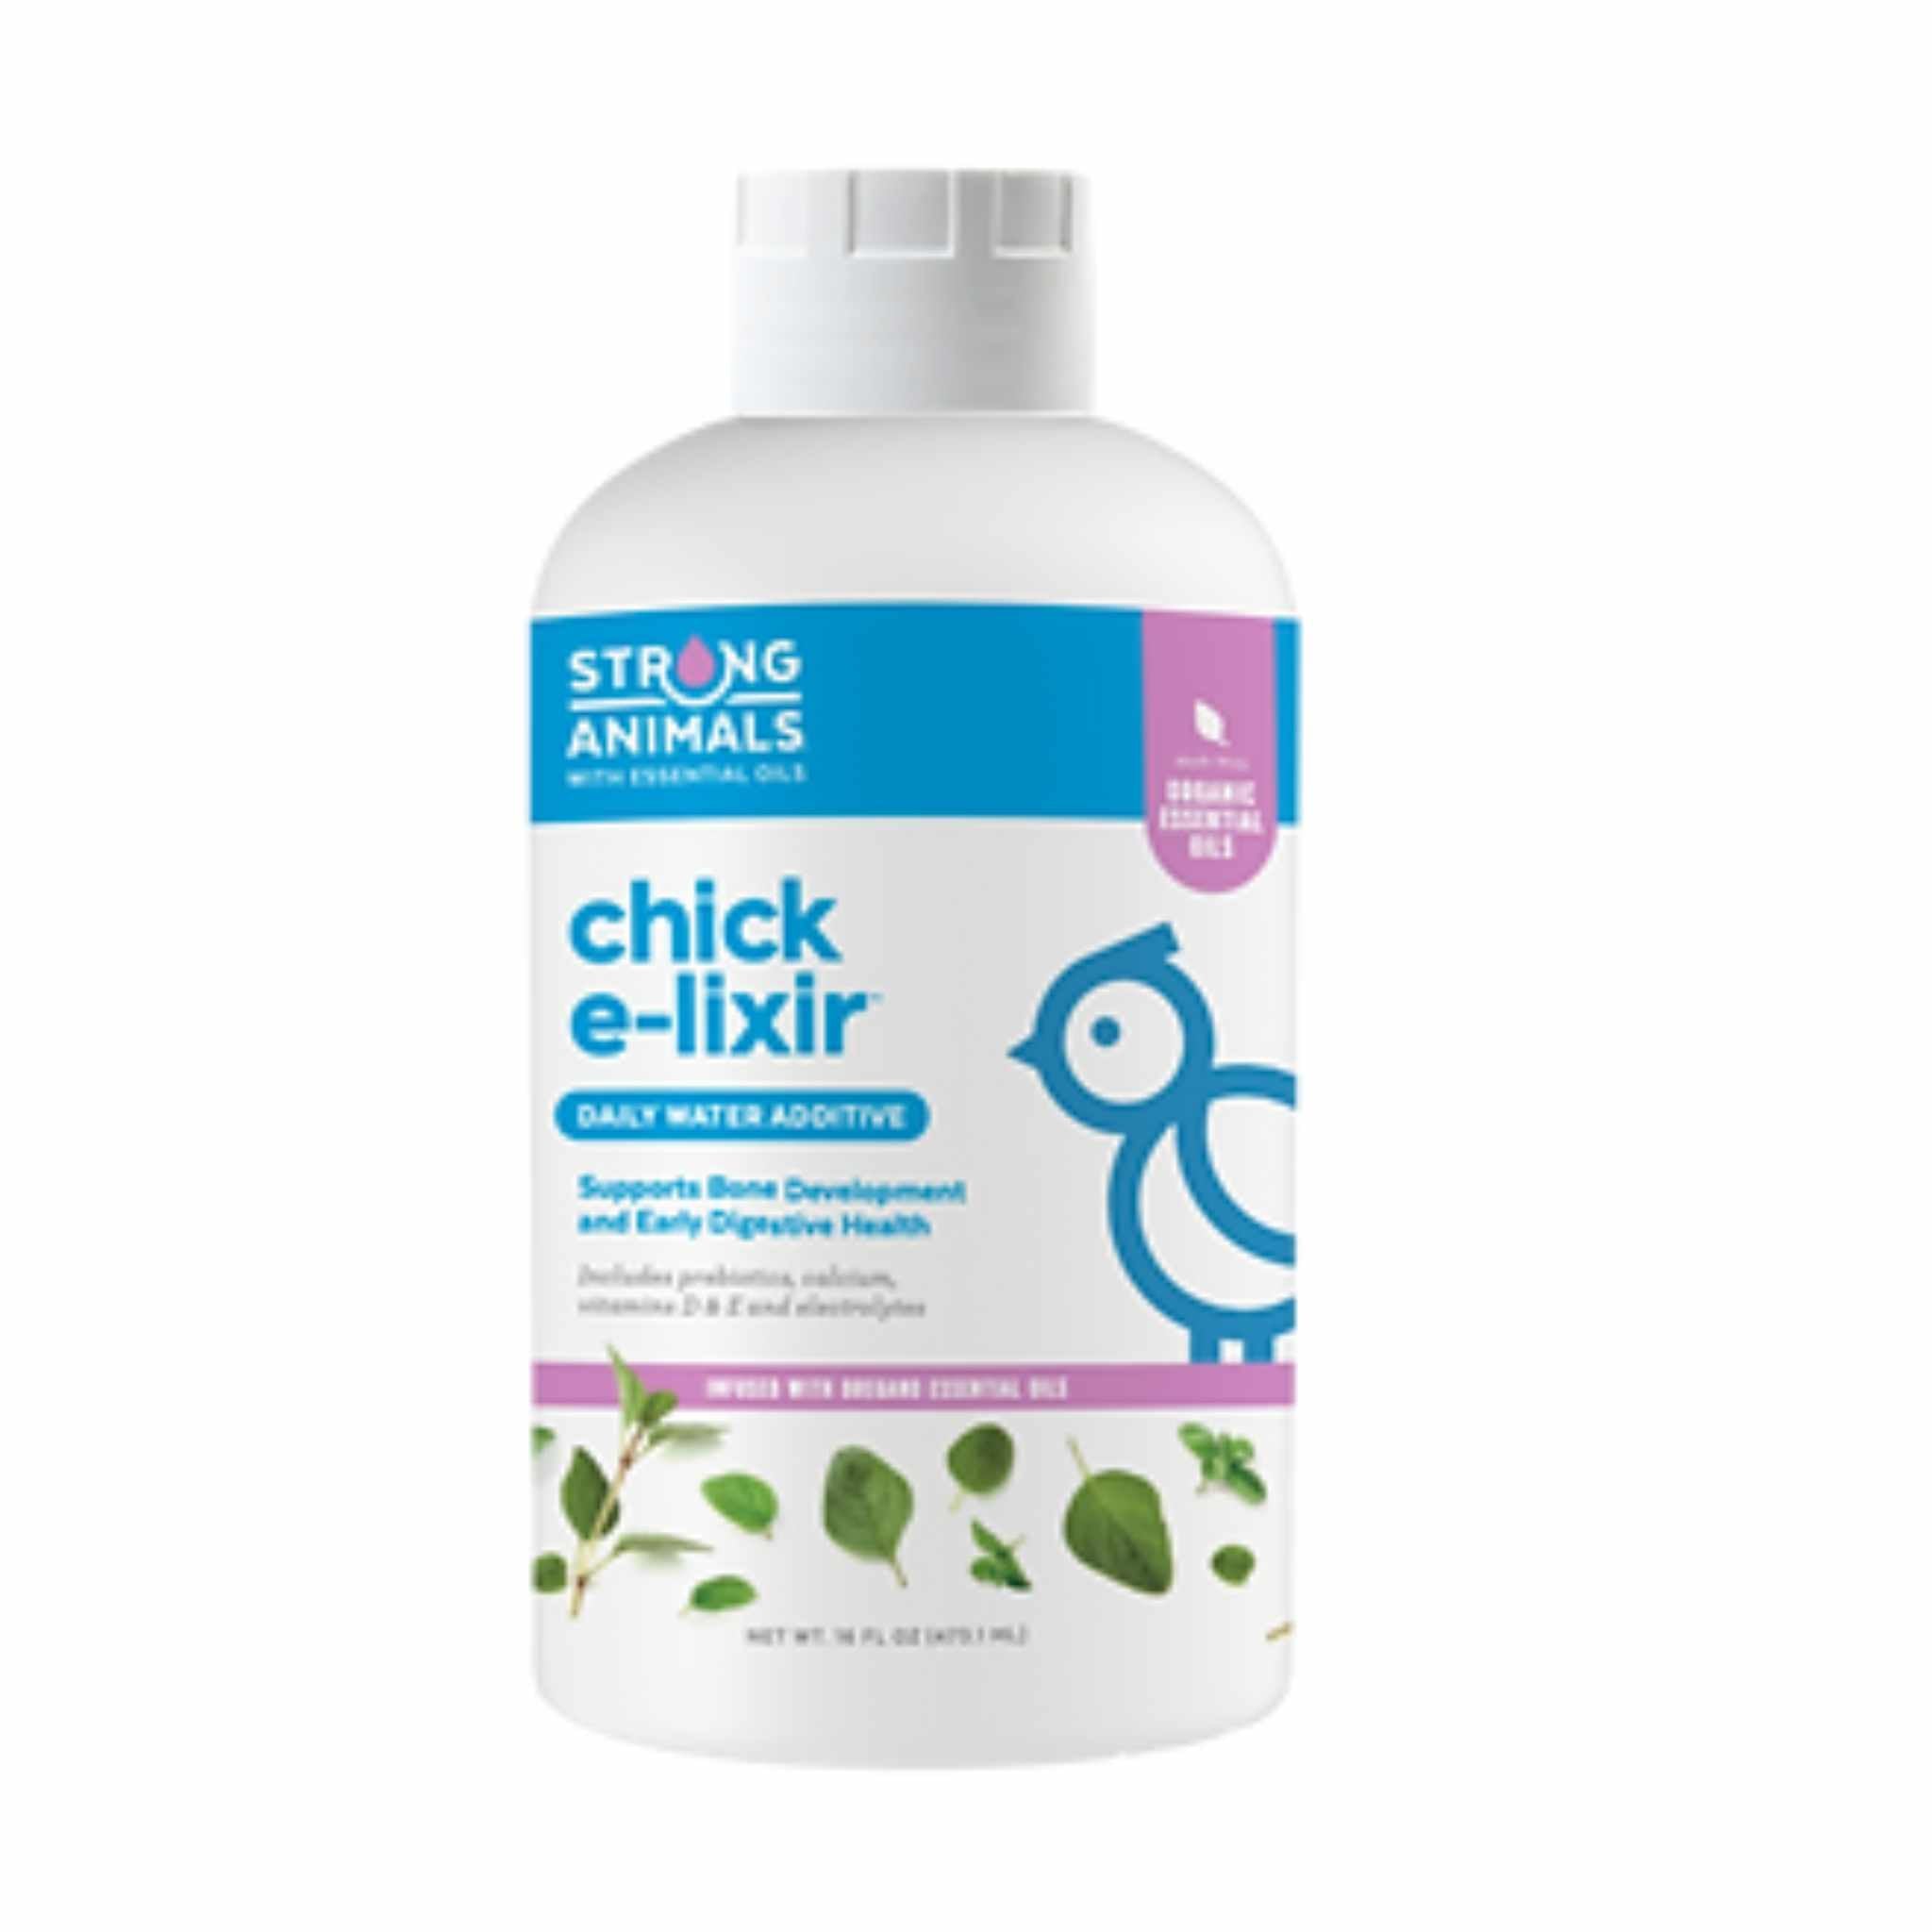 Hatching Time Strong Animals. Chick e-lixer daily water additive bottle can be seen in image. 